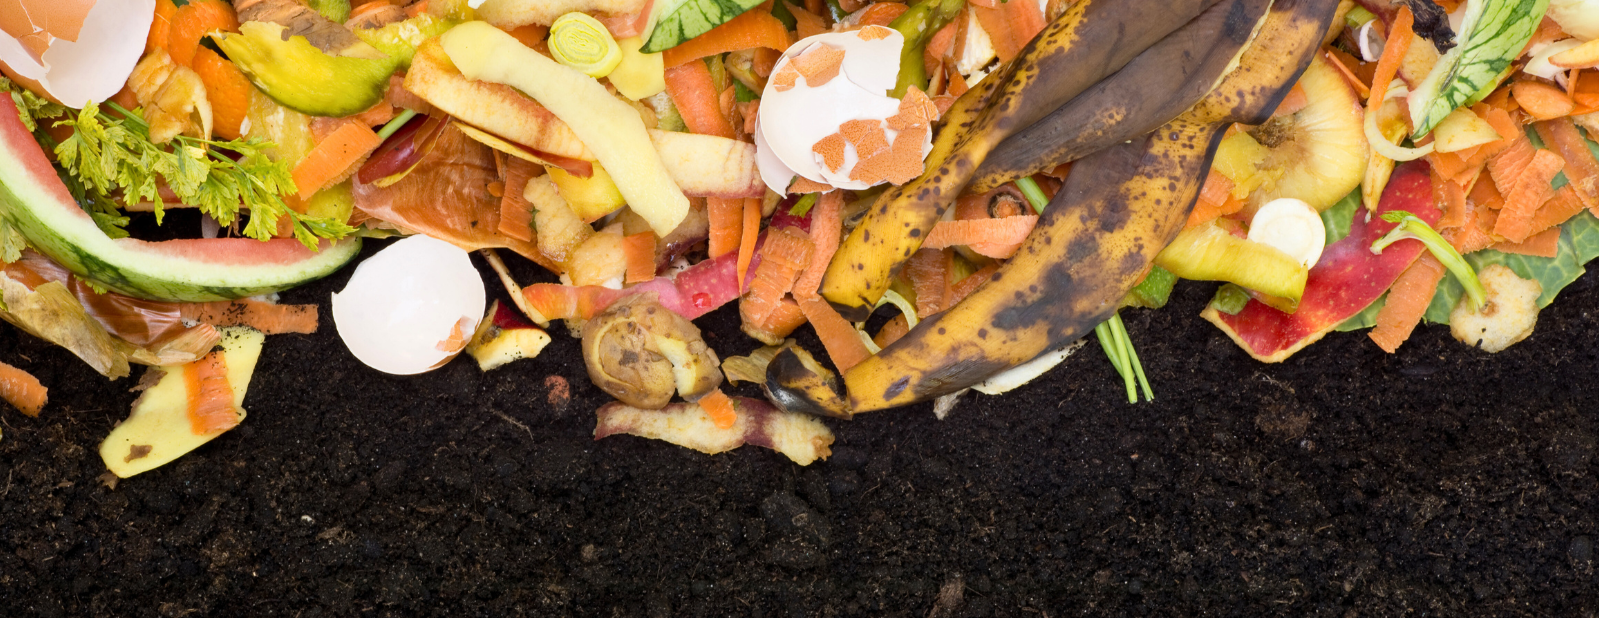 Food scraps become soil through the composting process